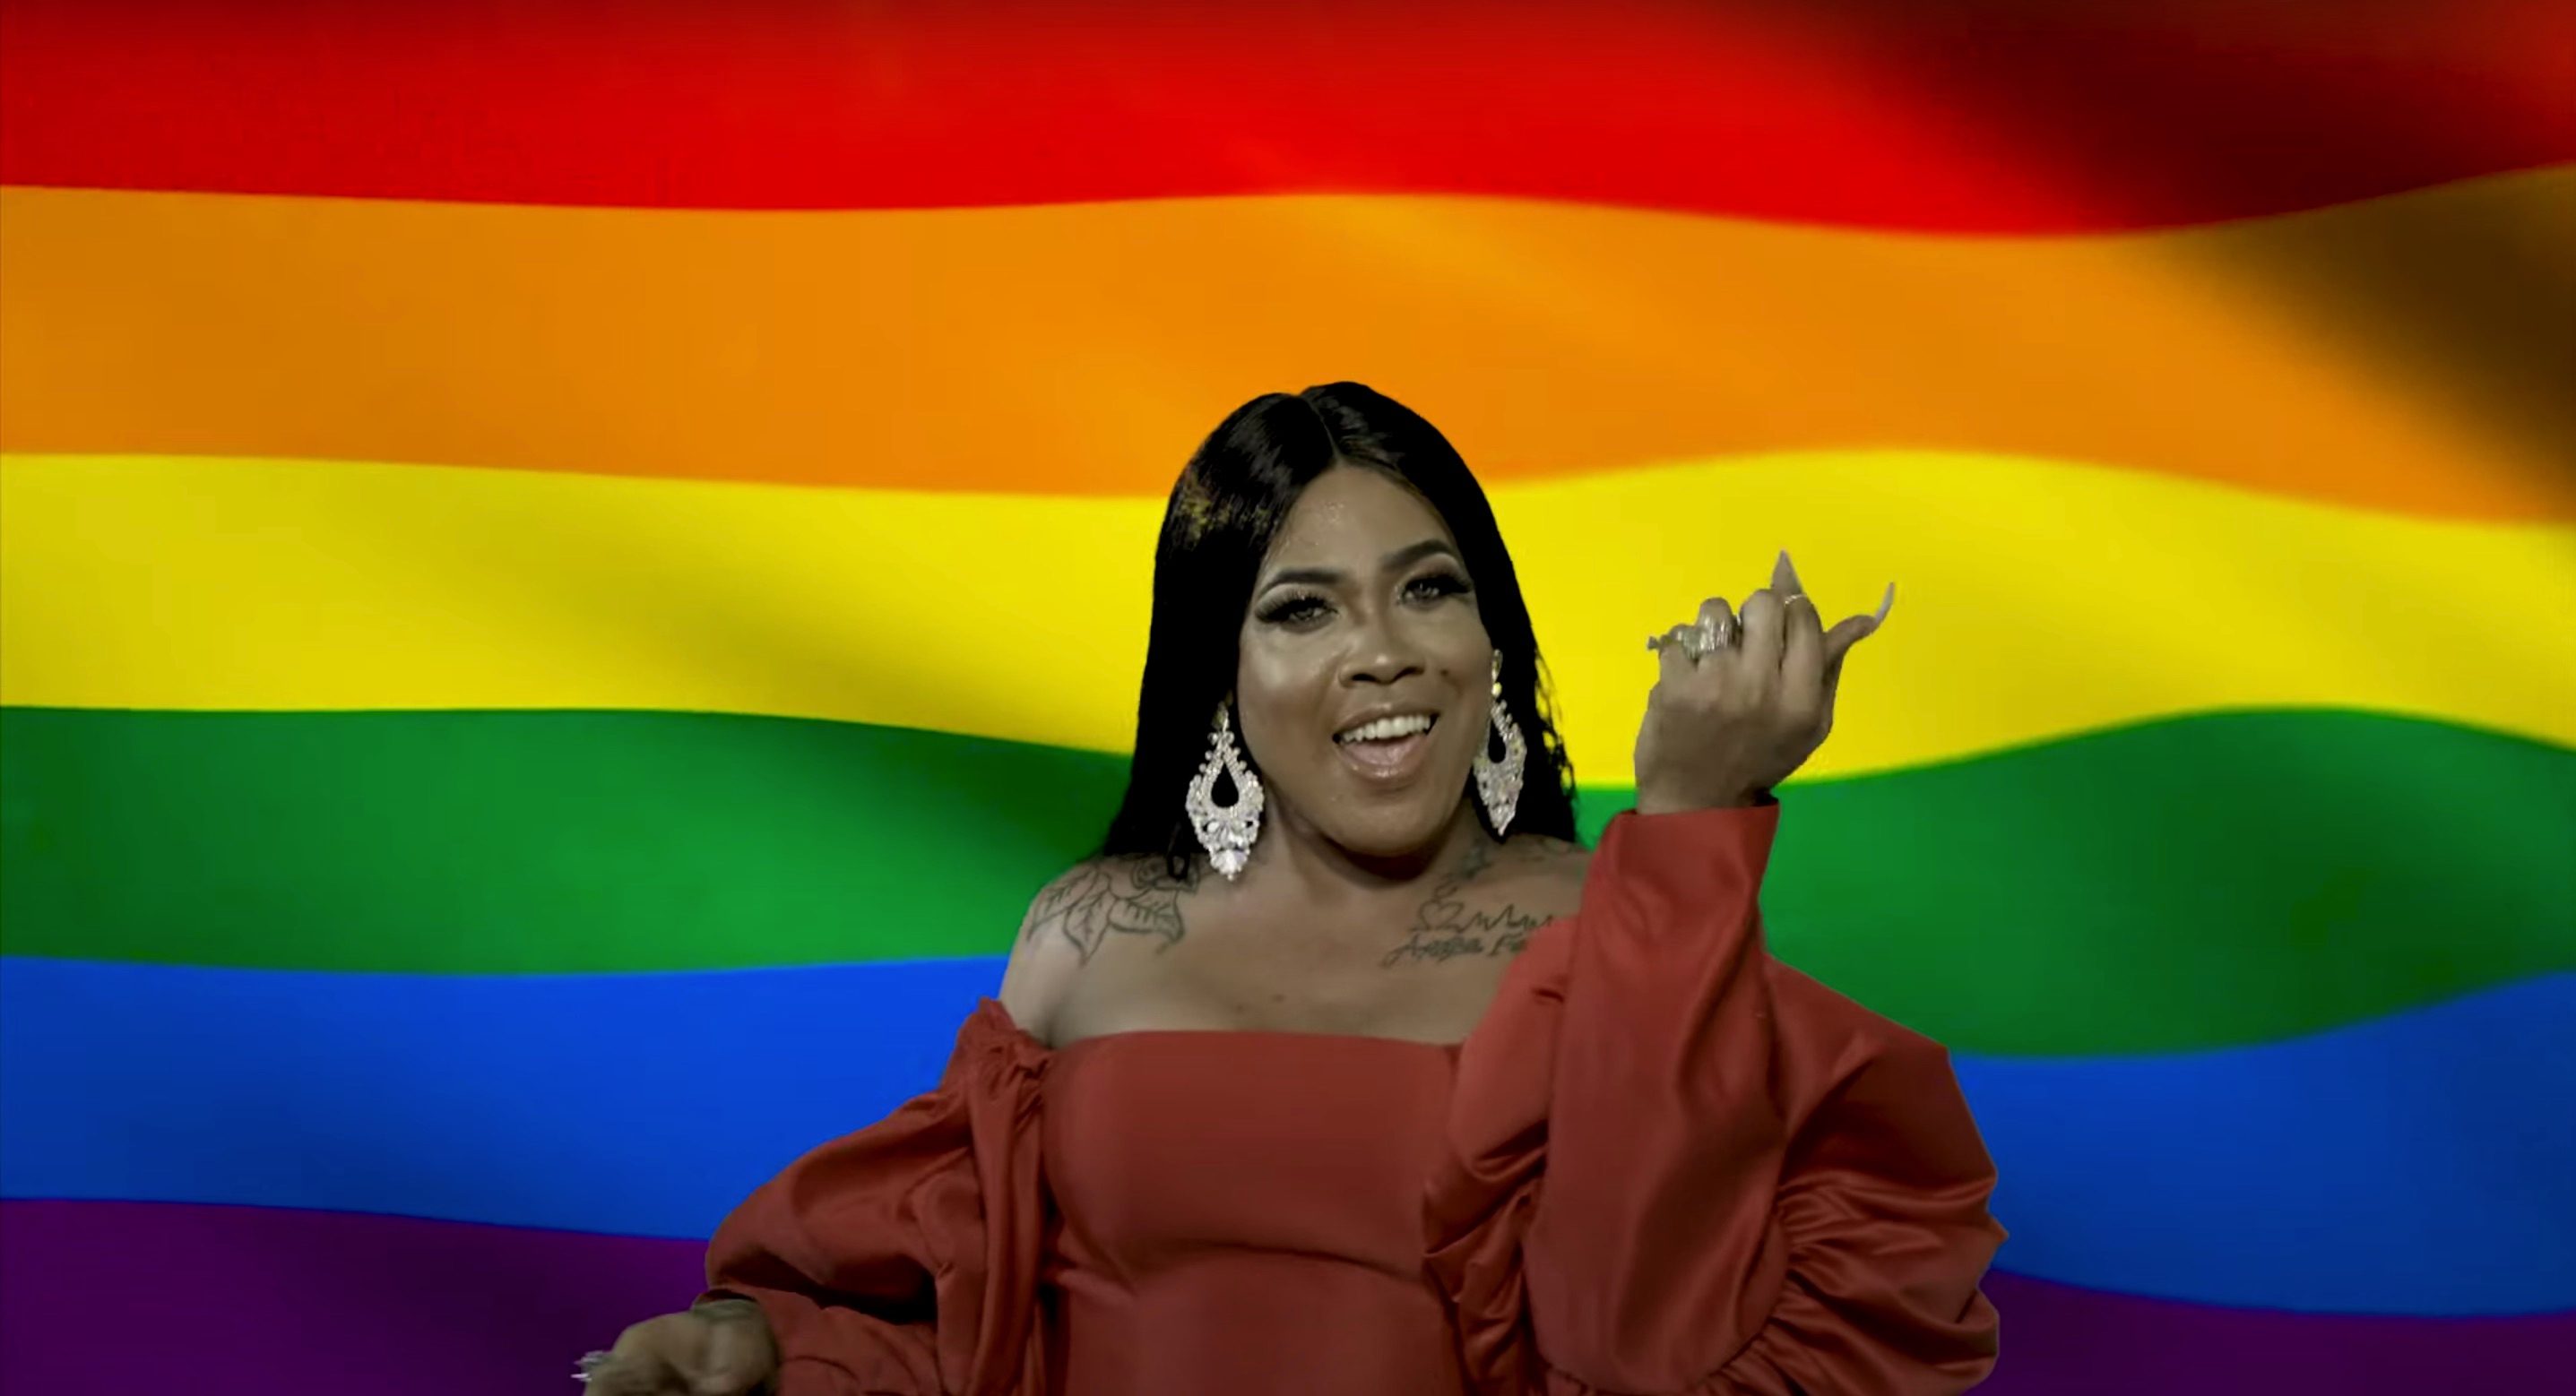 Ghana’s first openly trans musician fights homophobia with song